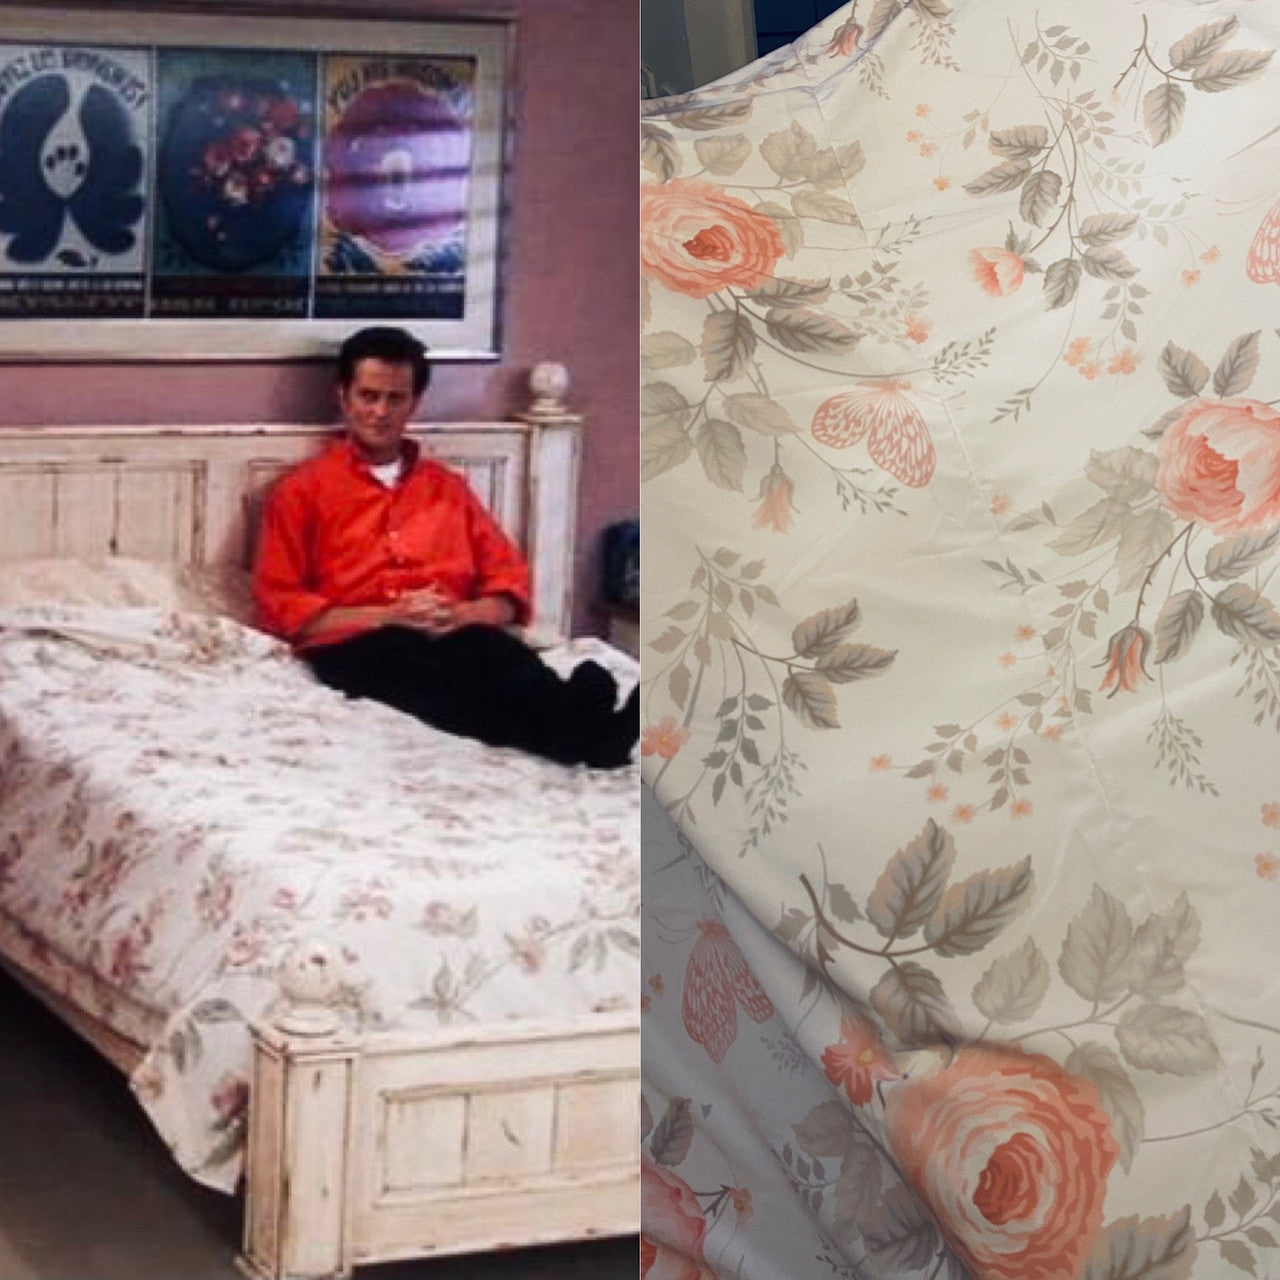 Floral Friends Duvet Cover - Handmade Hand Stitched Bedding - Monica Geller Inspired Style - TV Show Apartment 90s Theme